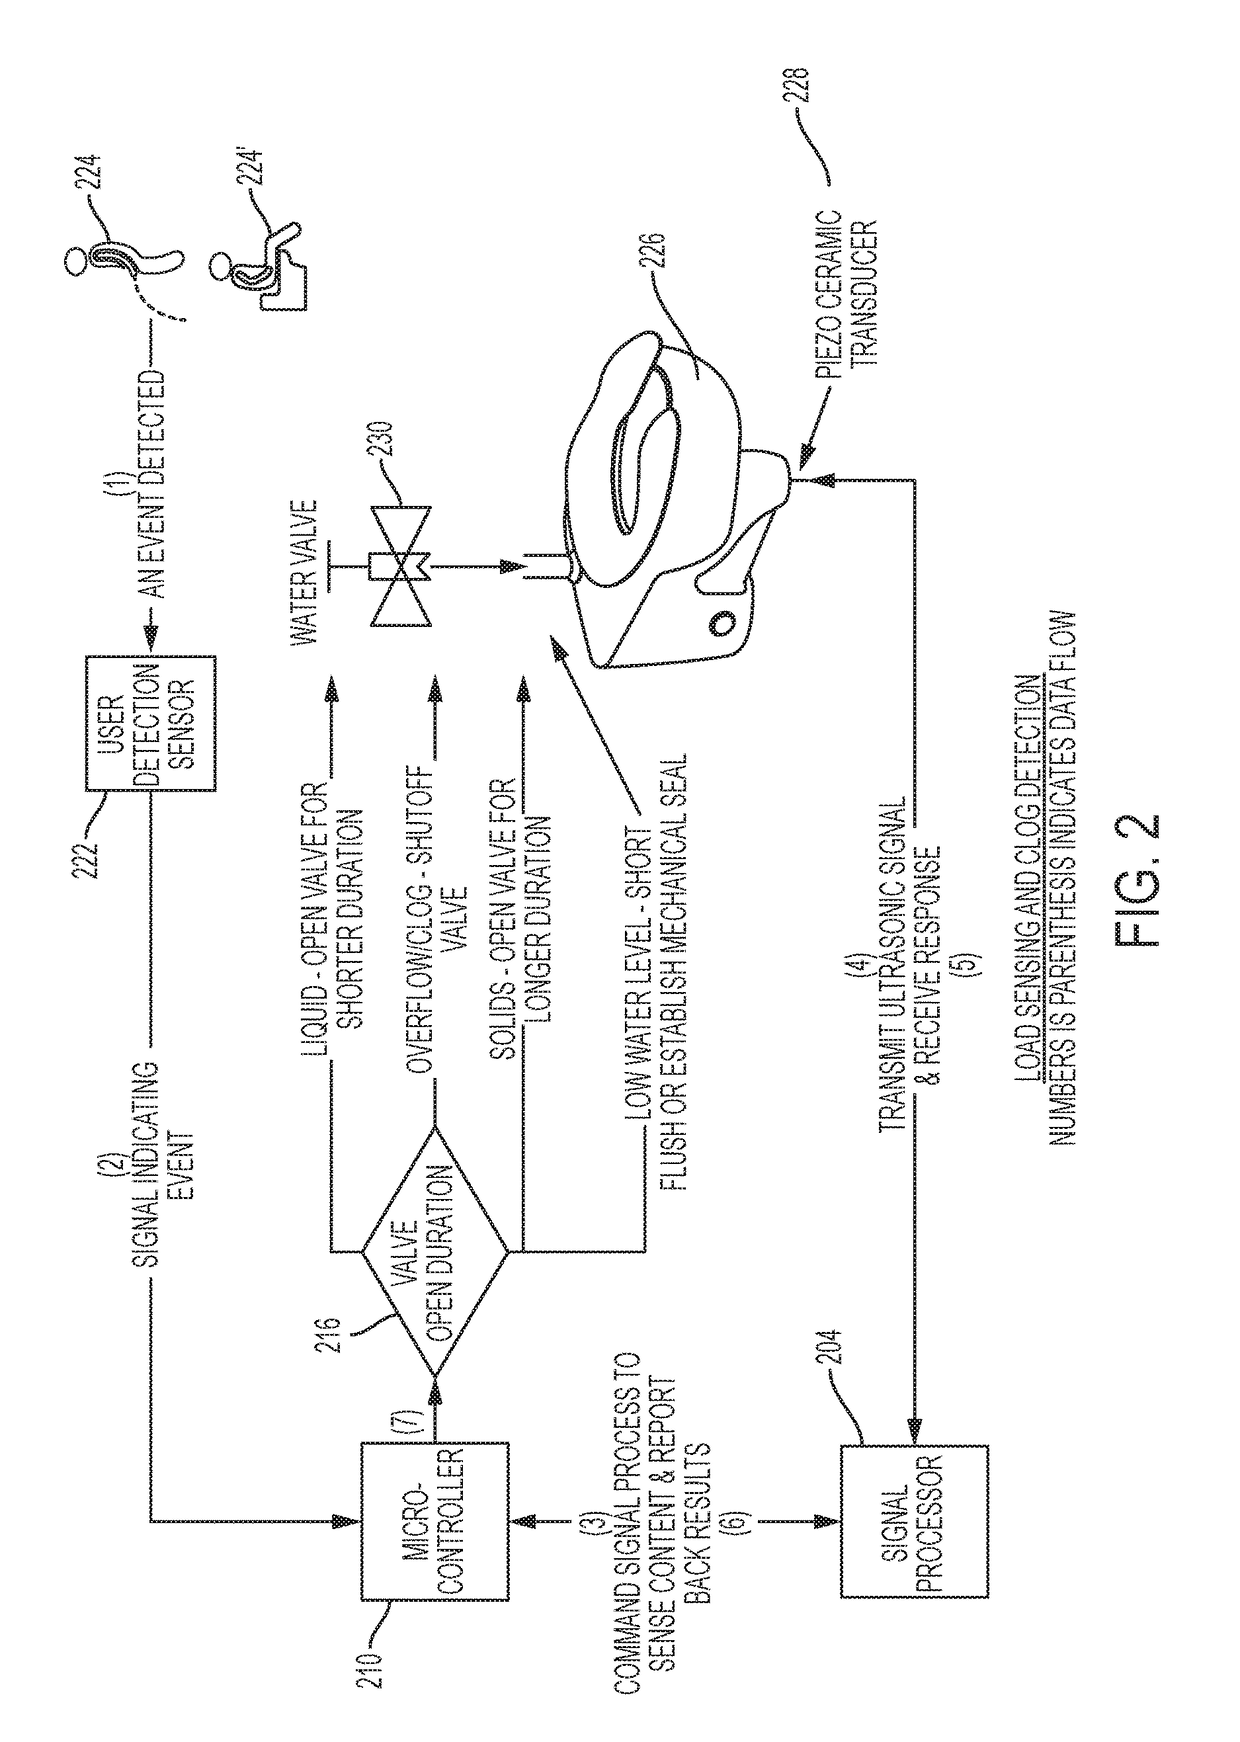 Systems to Automate Adjustment of Water Volume Release To A Toilet Bowl To Correspond to Bowl Contents, Toilets Including the System and Related Methods